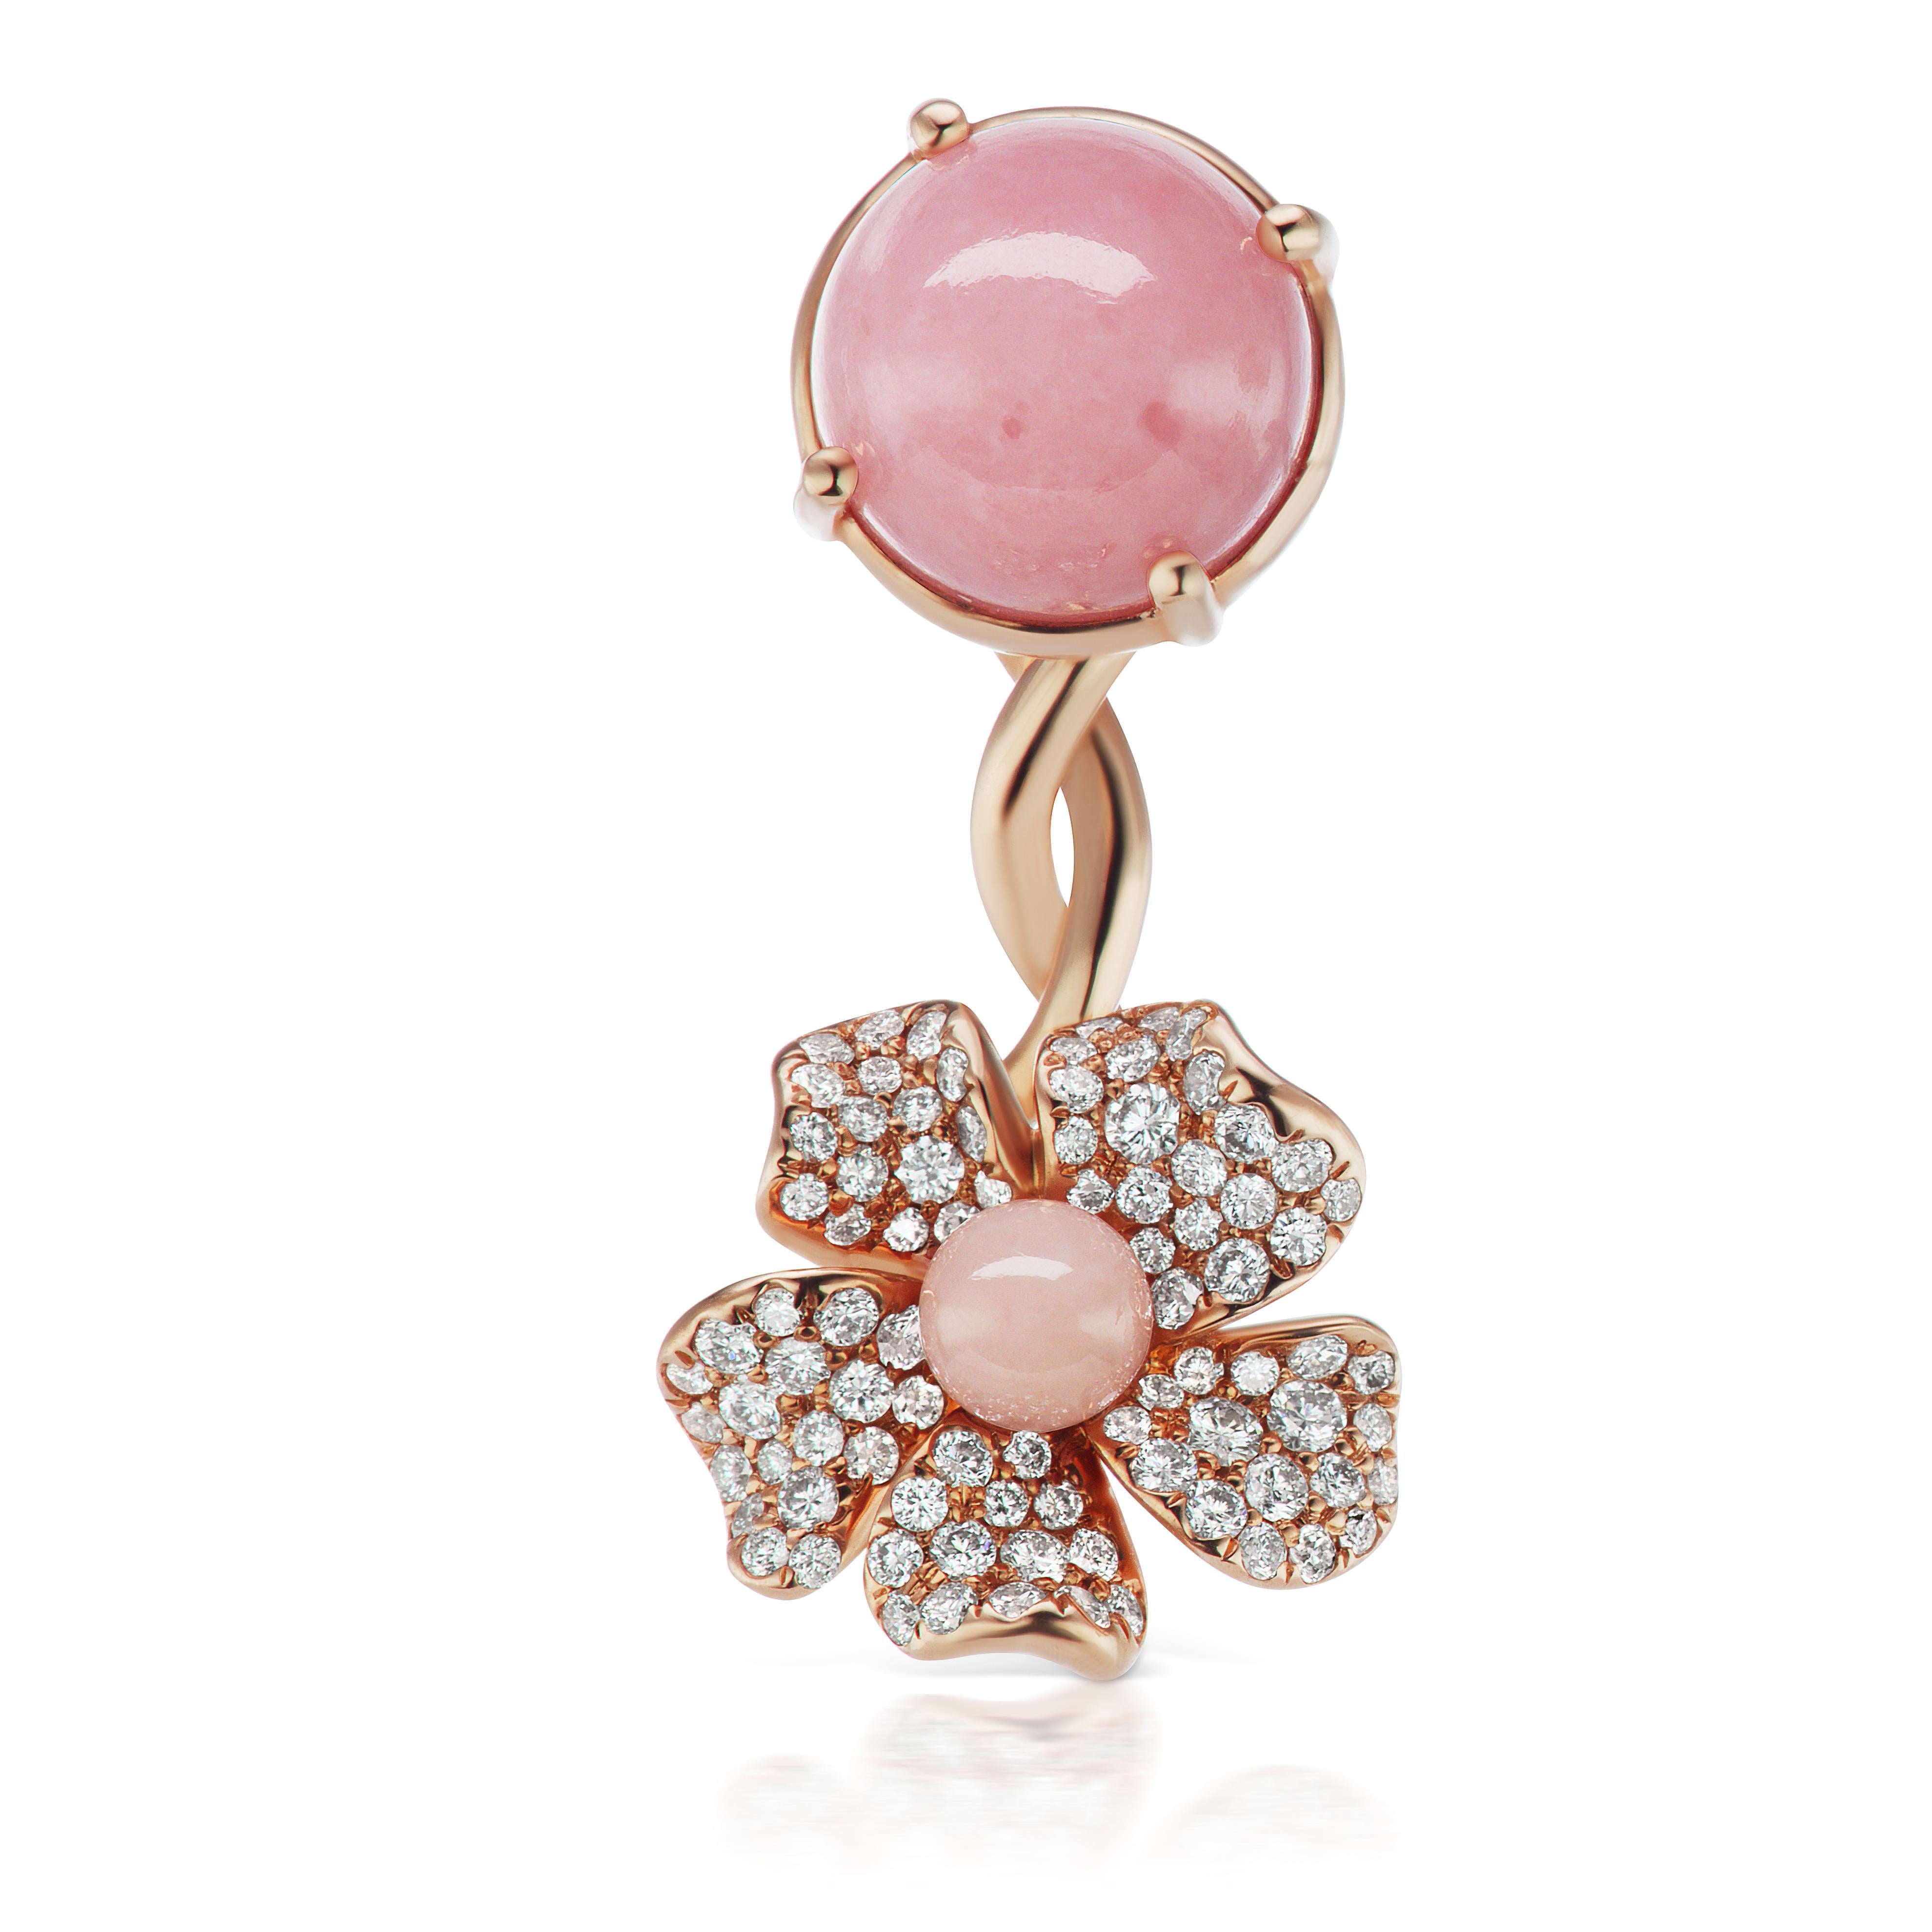 18K Yellow Gold Flower Earring with Pink Opals and Diamonds.
0.66 ct tw.
1.25